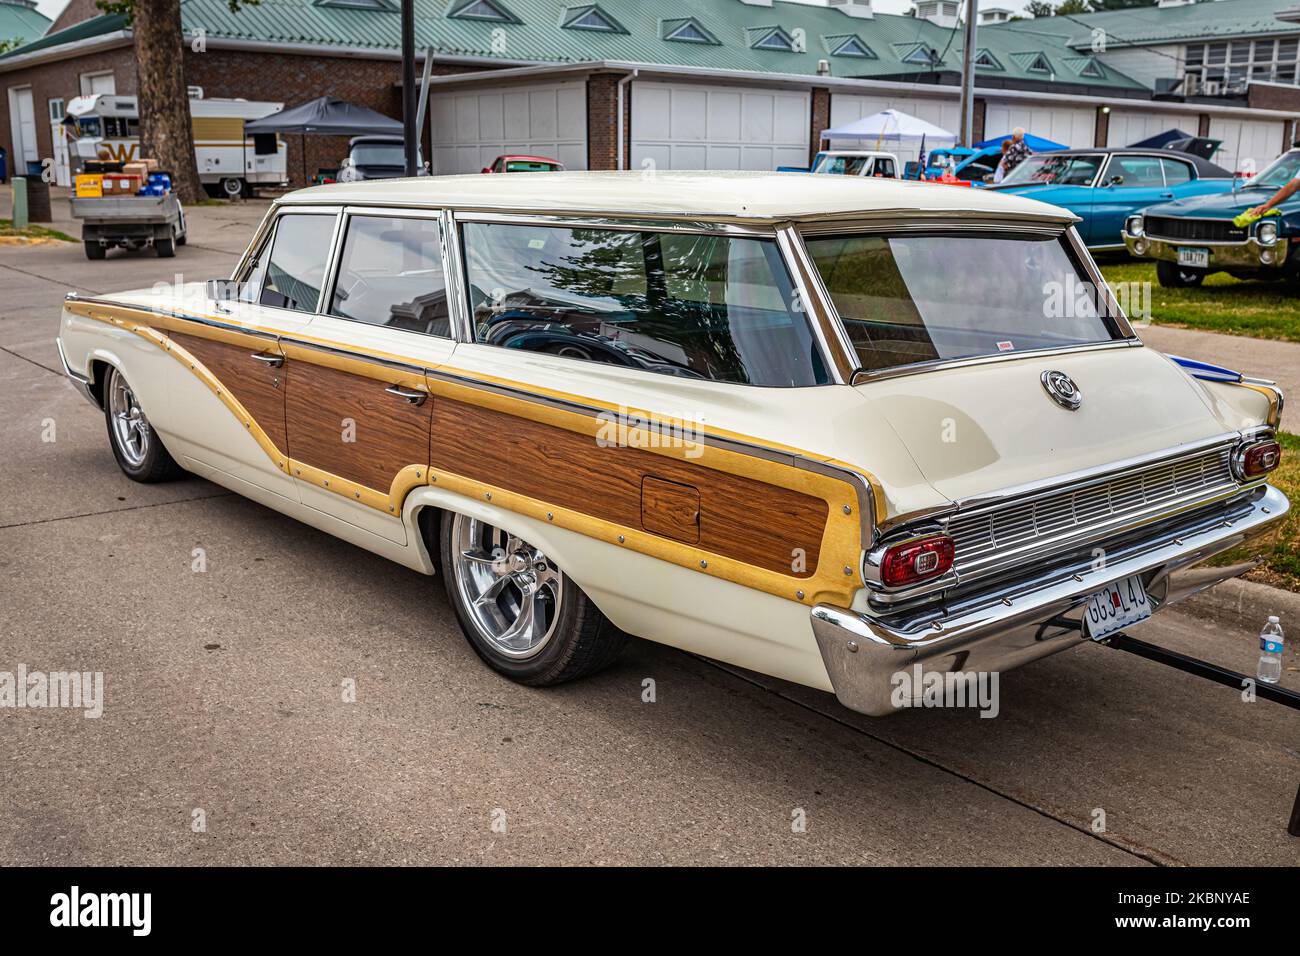 Des Moines, IA - July 01, 2022: High perspective rear corner view of a 1964 Mercury Colony Park Station Wagon at a local car show. Stock Photo